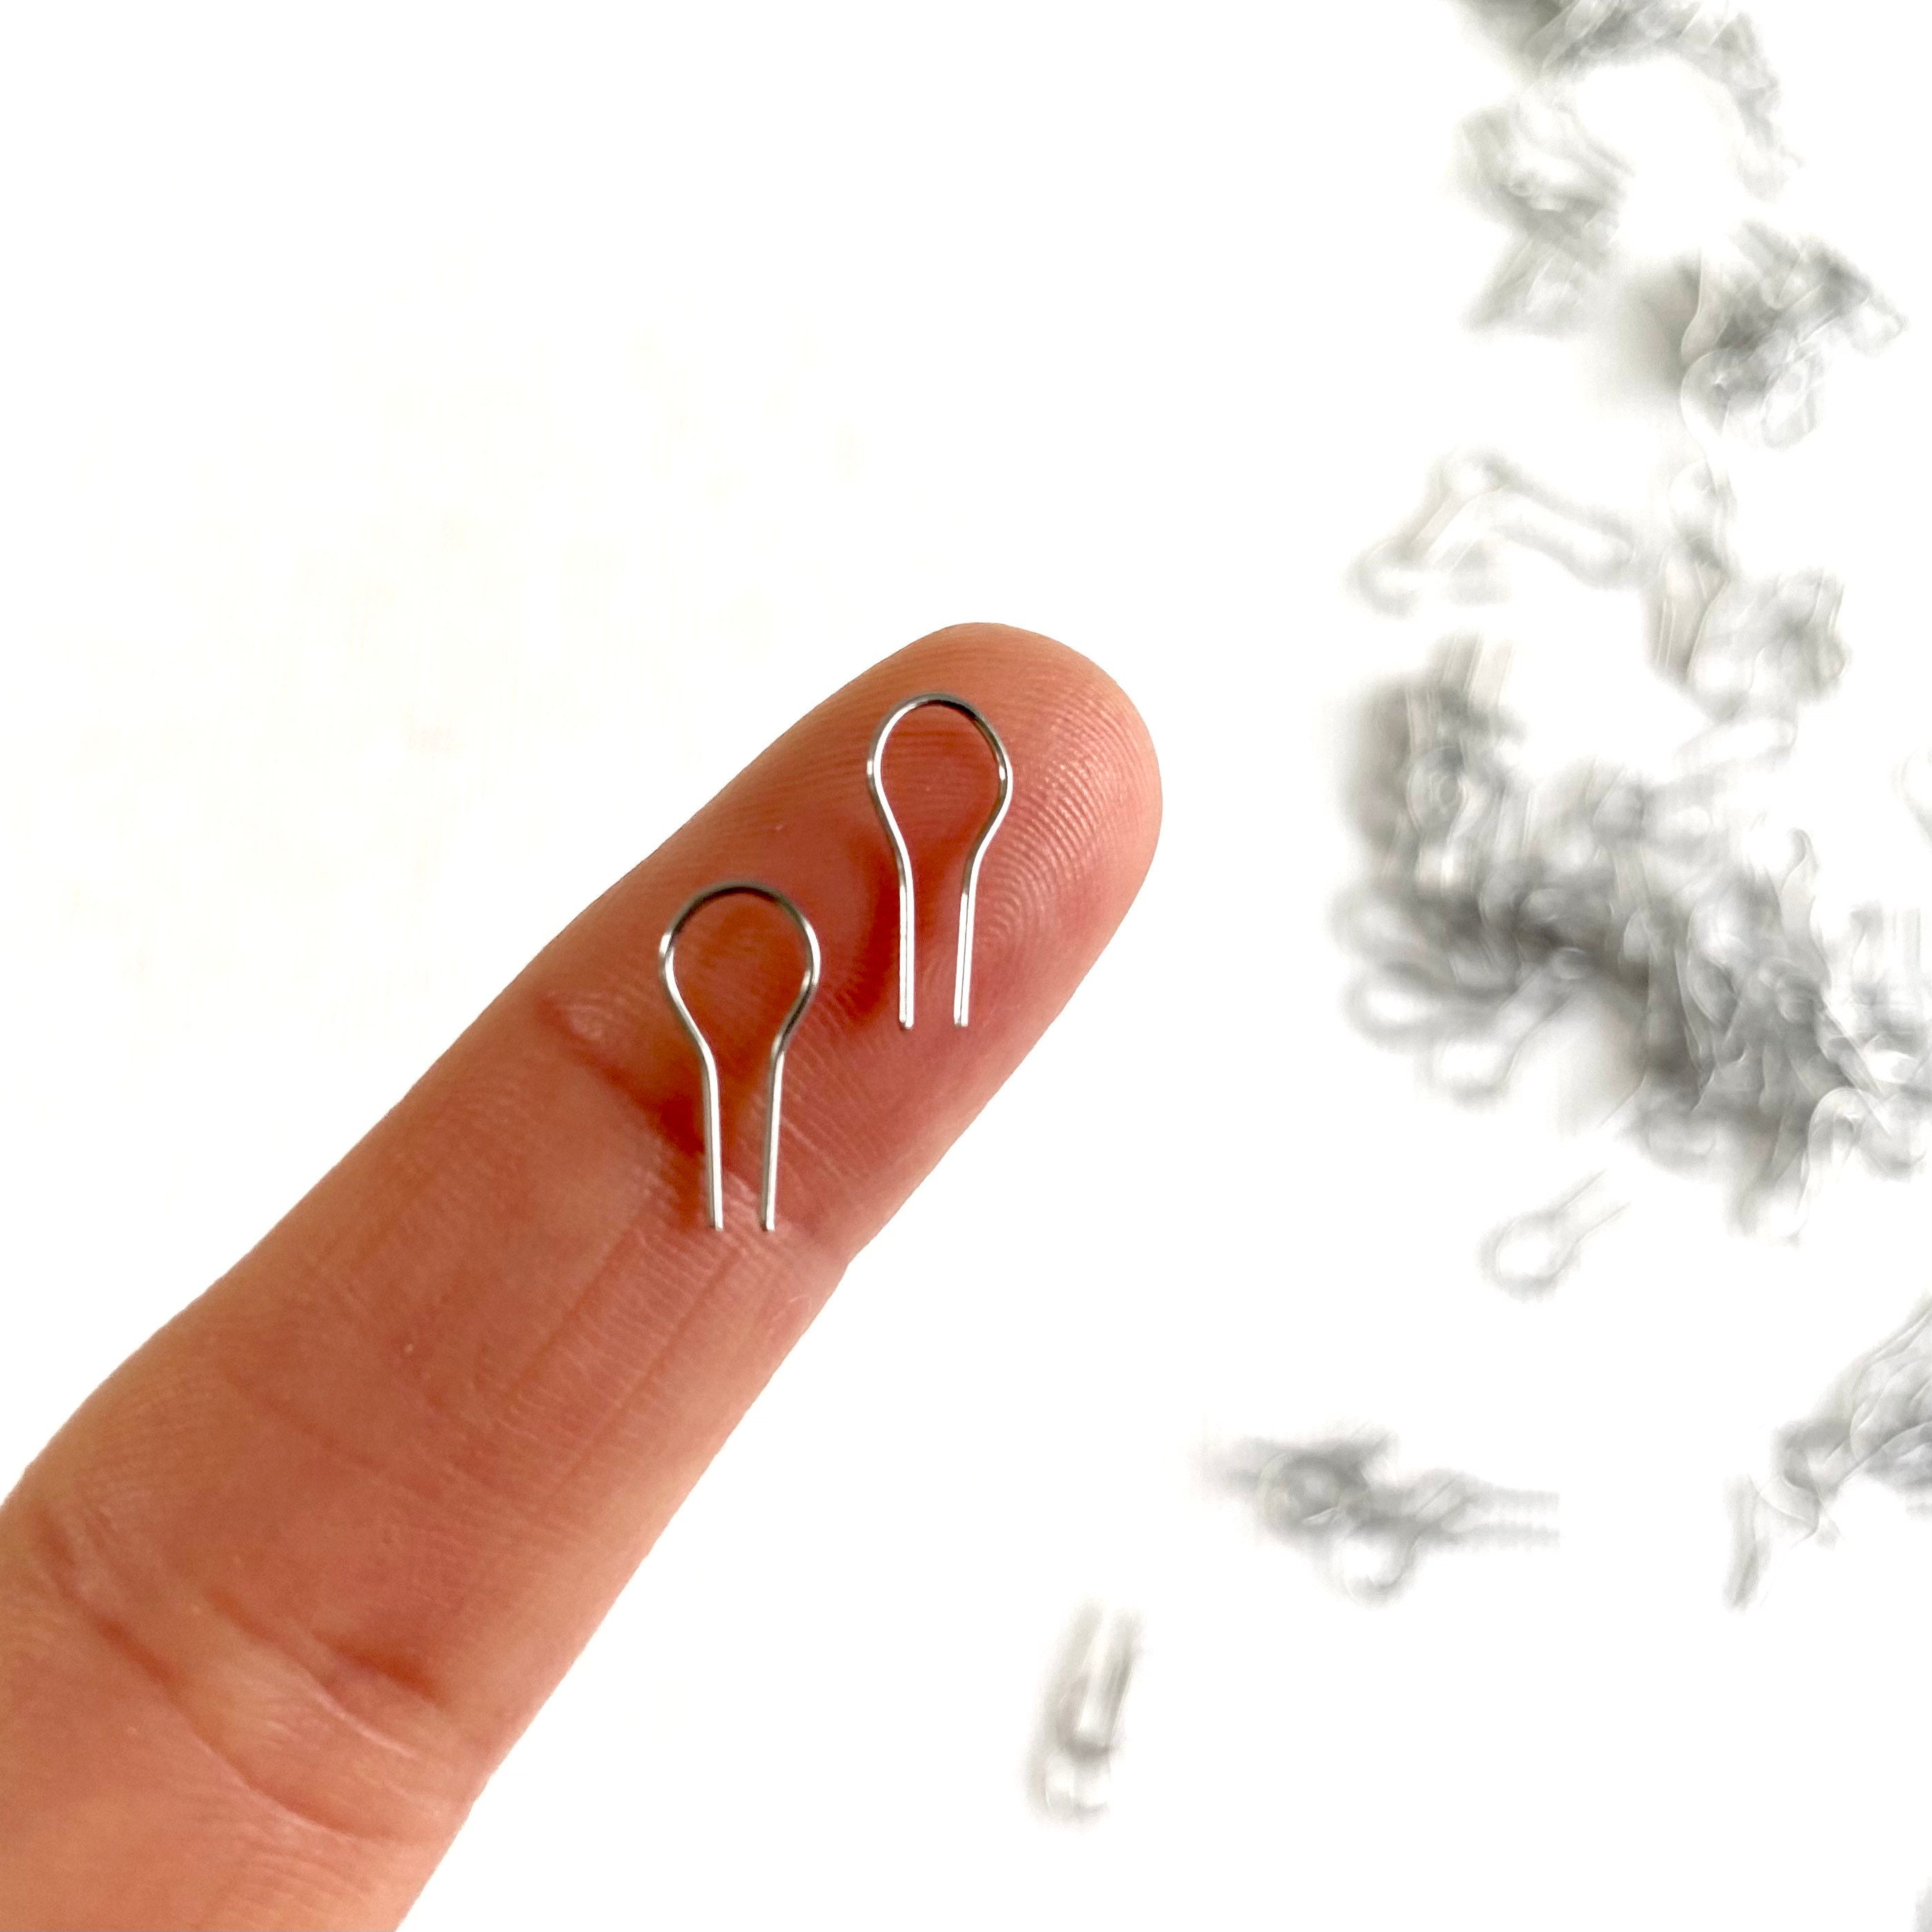 Metal Small Eye Hook Screw Pins Tiny Eye Pins Gold Silver Clasp Hooks  Connector For Handmade DIY Jewelry Making Findings From Familyflooring,  $39.2